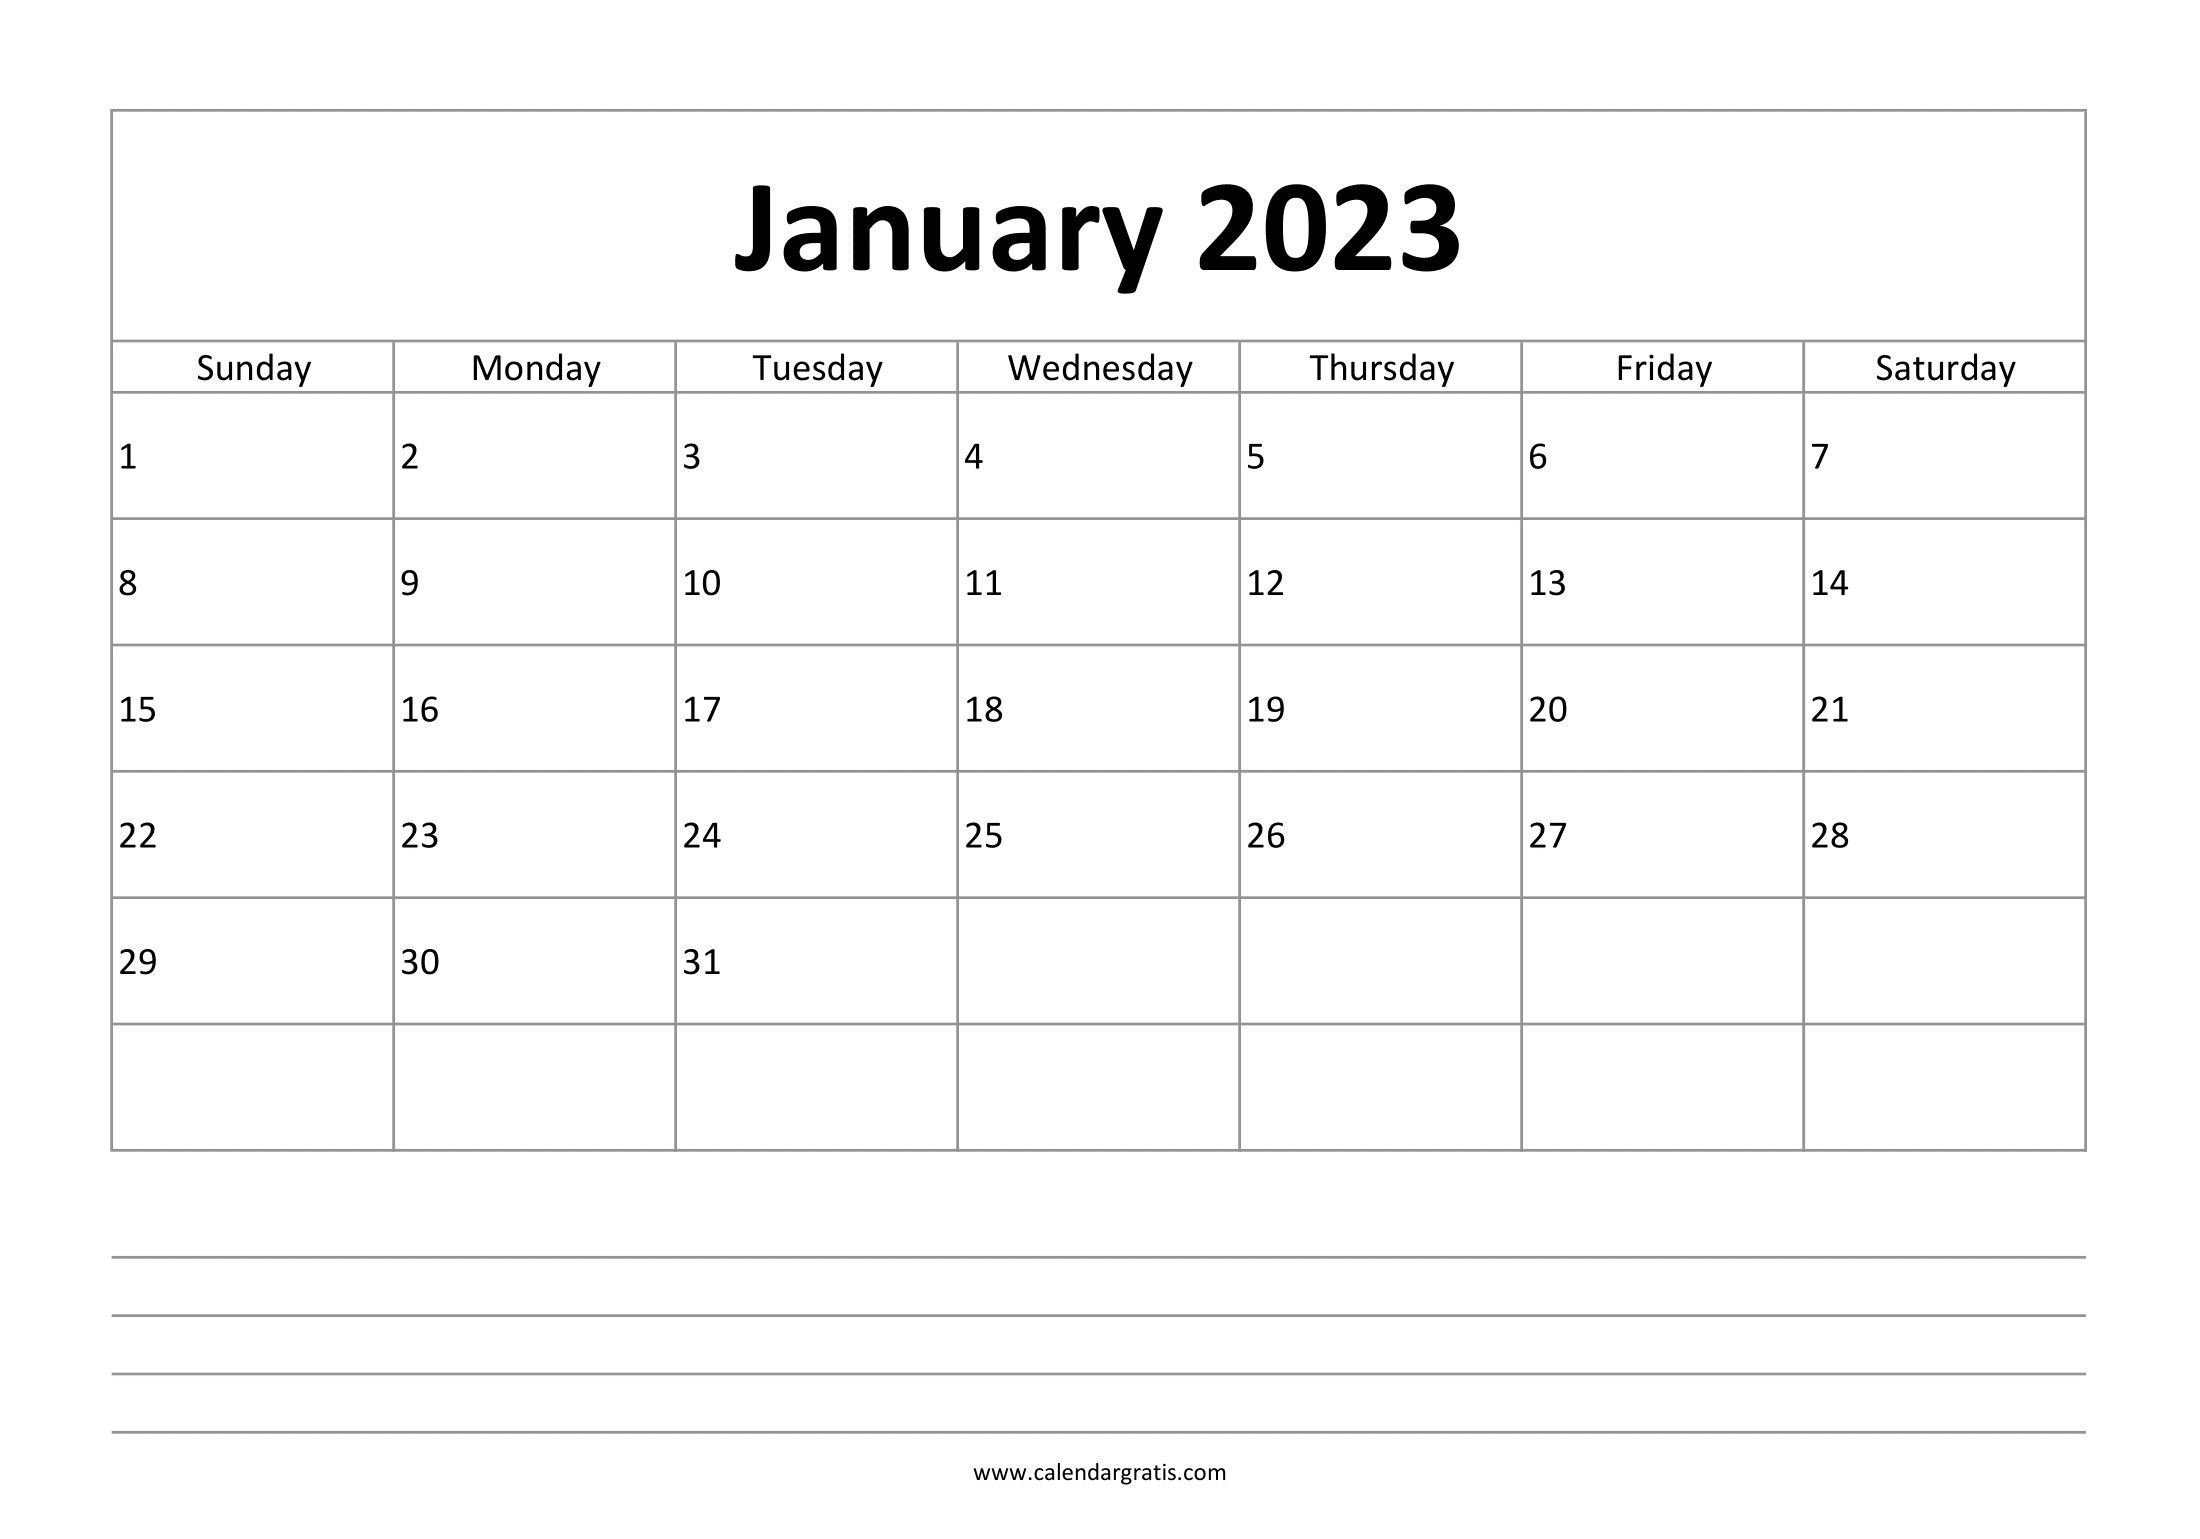 Free printable January 2023 calendar for making important notes. Create monthly to-do lists and manage all your activities.